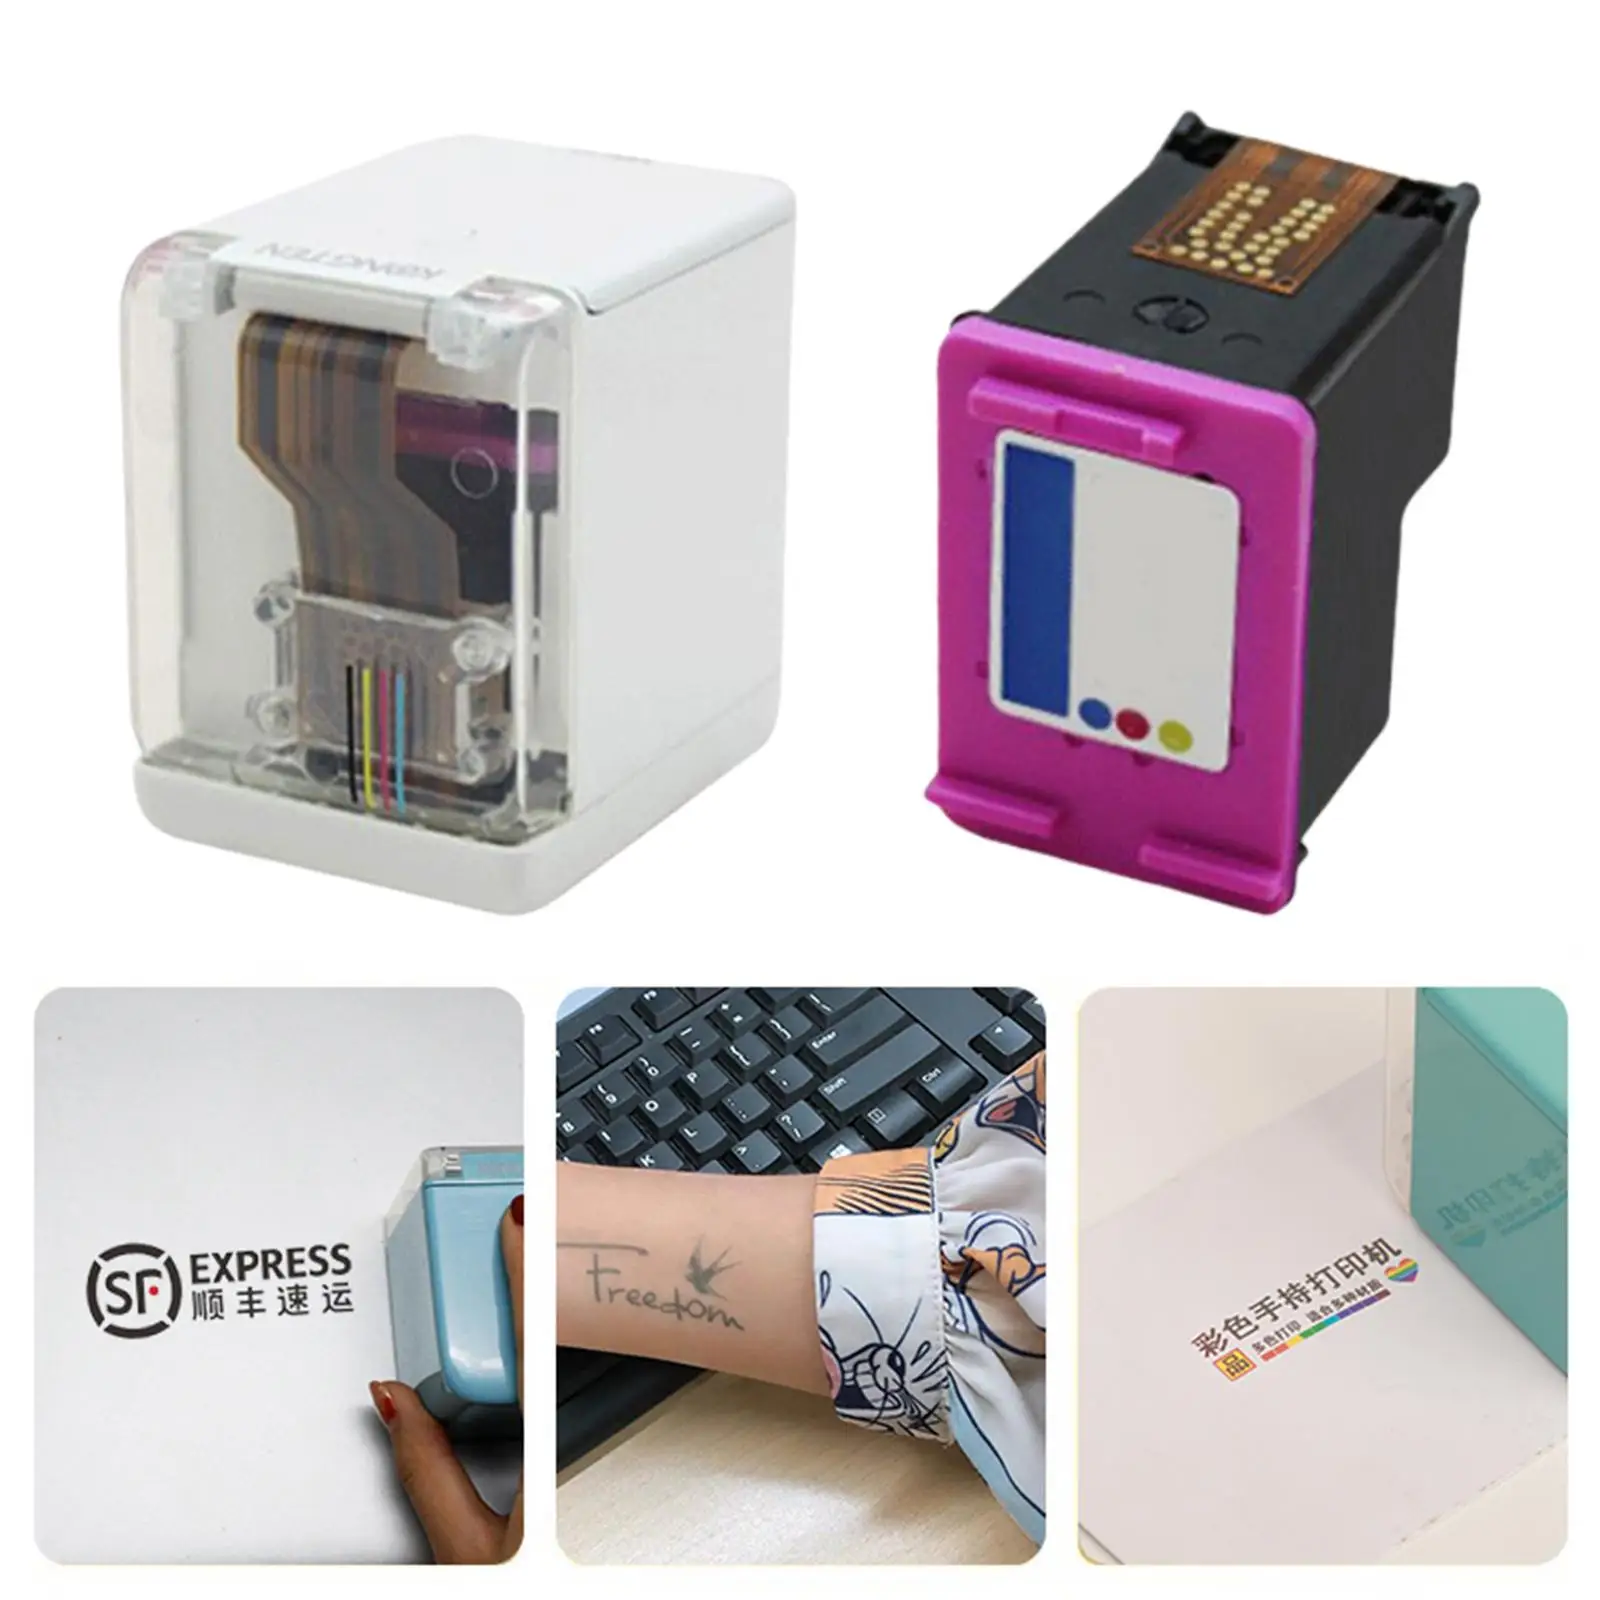 USB Wireless WiFi Handheld Full Color Printer Easy to Use for All Materials